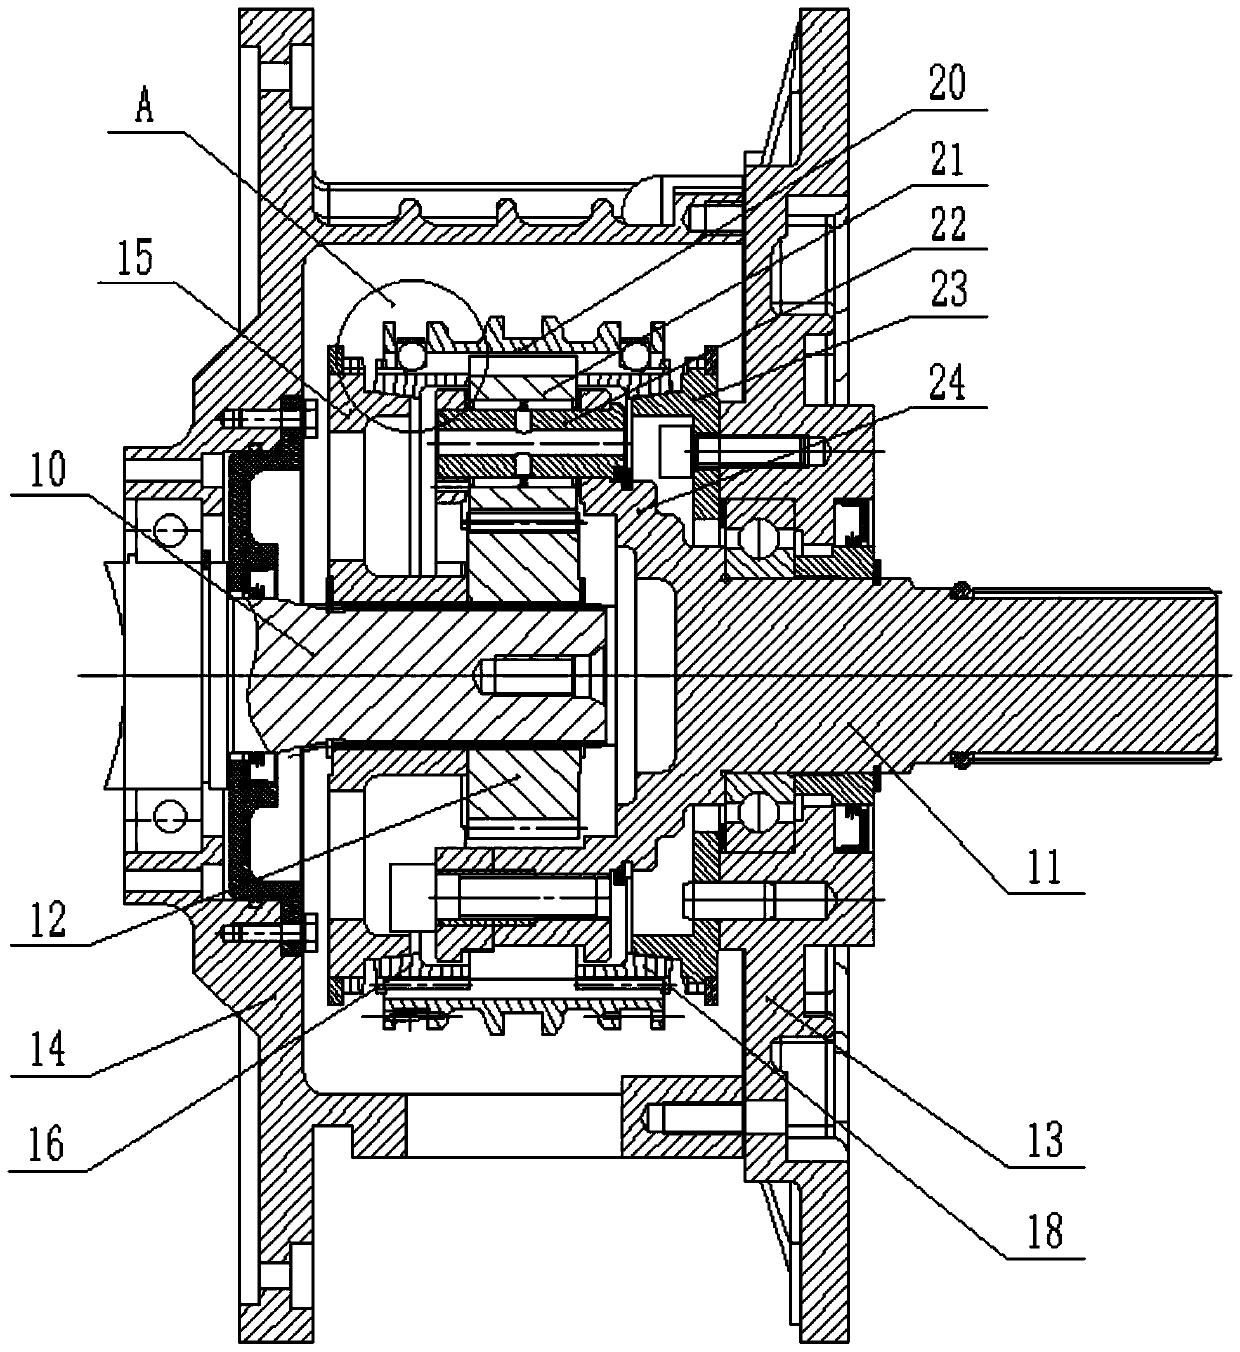 Integrated planetary mechanism two-gear transmission